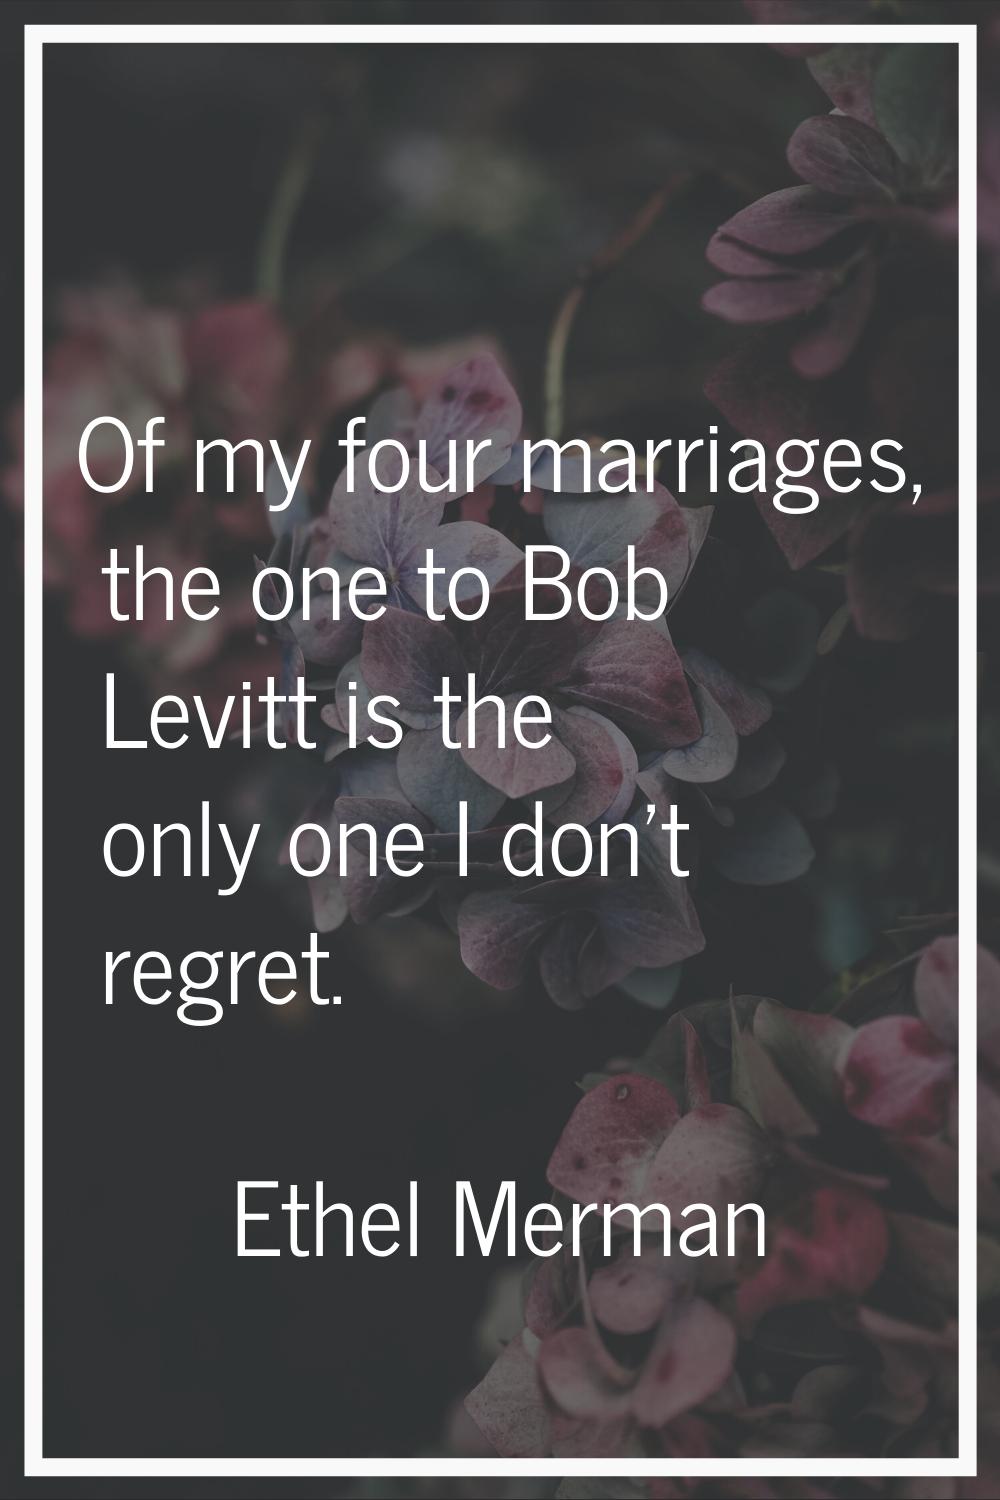 Of my four marriages, the one to Bob Levitt is the only one I don't regret.